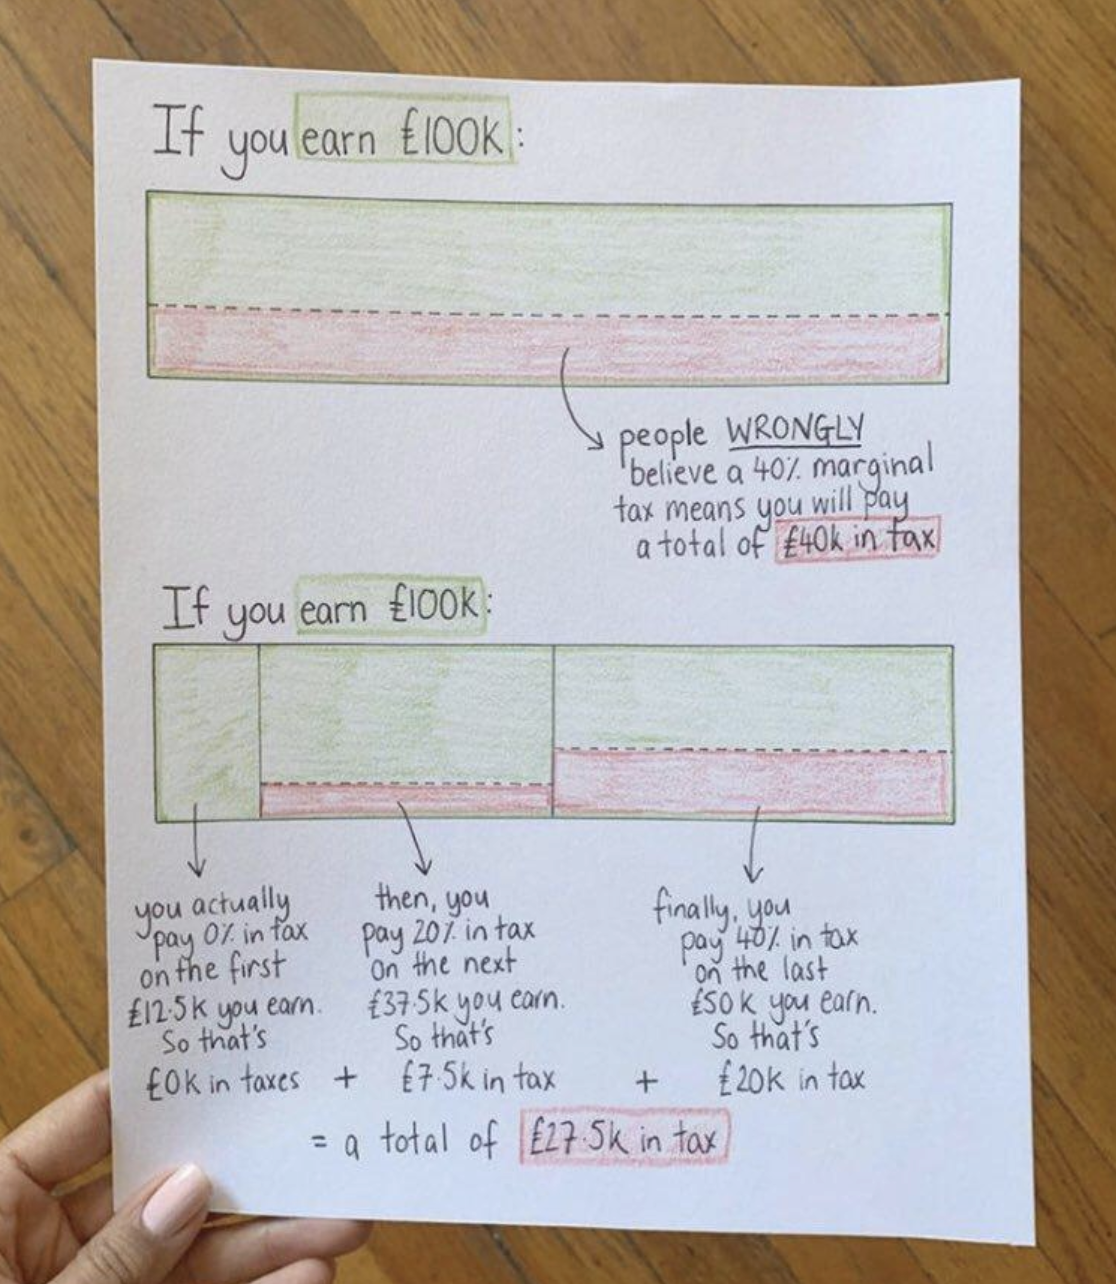 A chart showing how taxes work